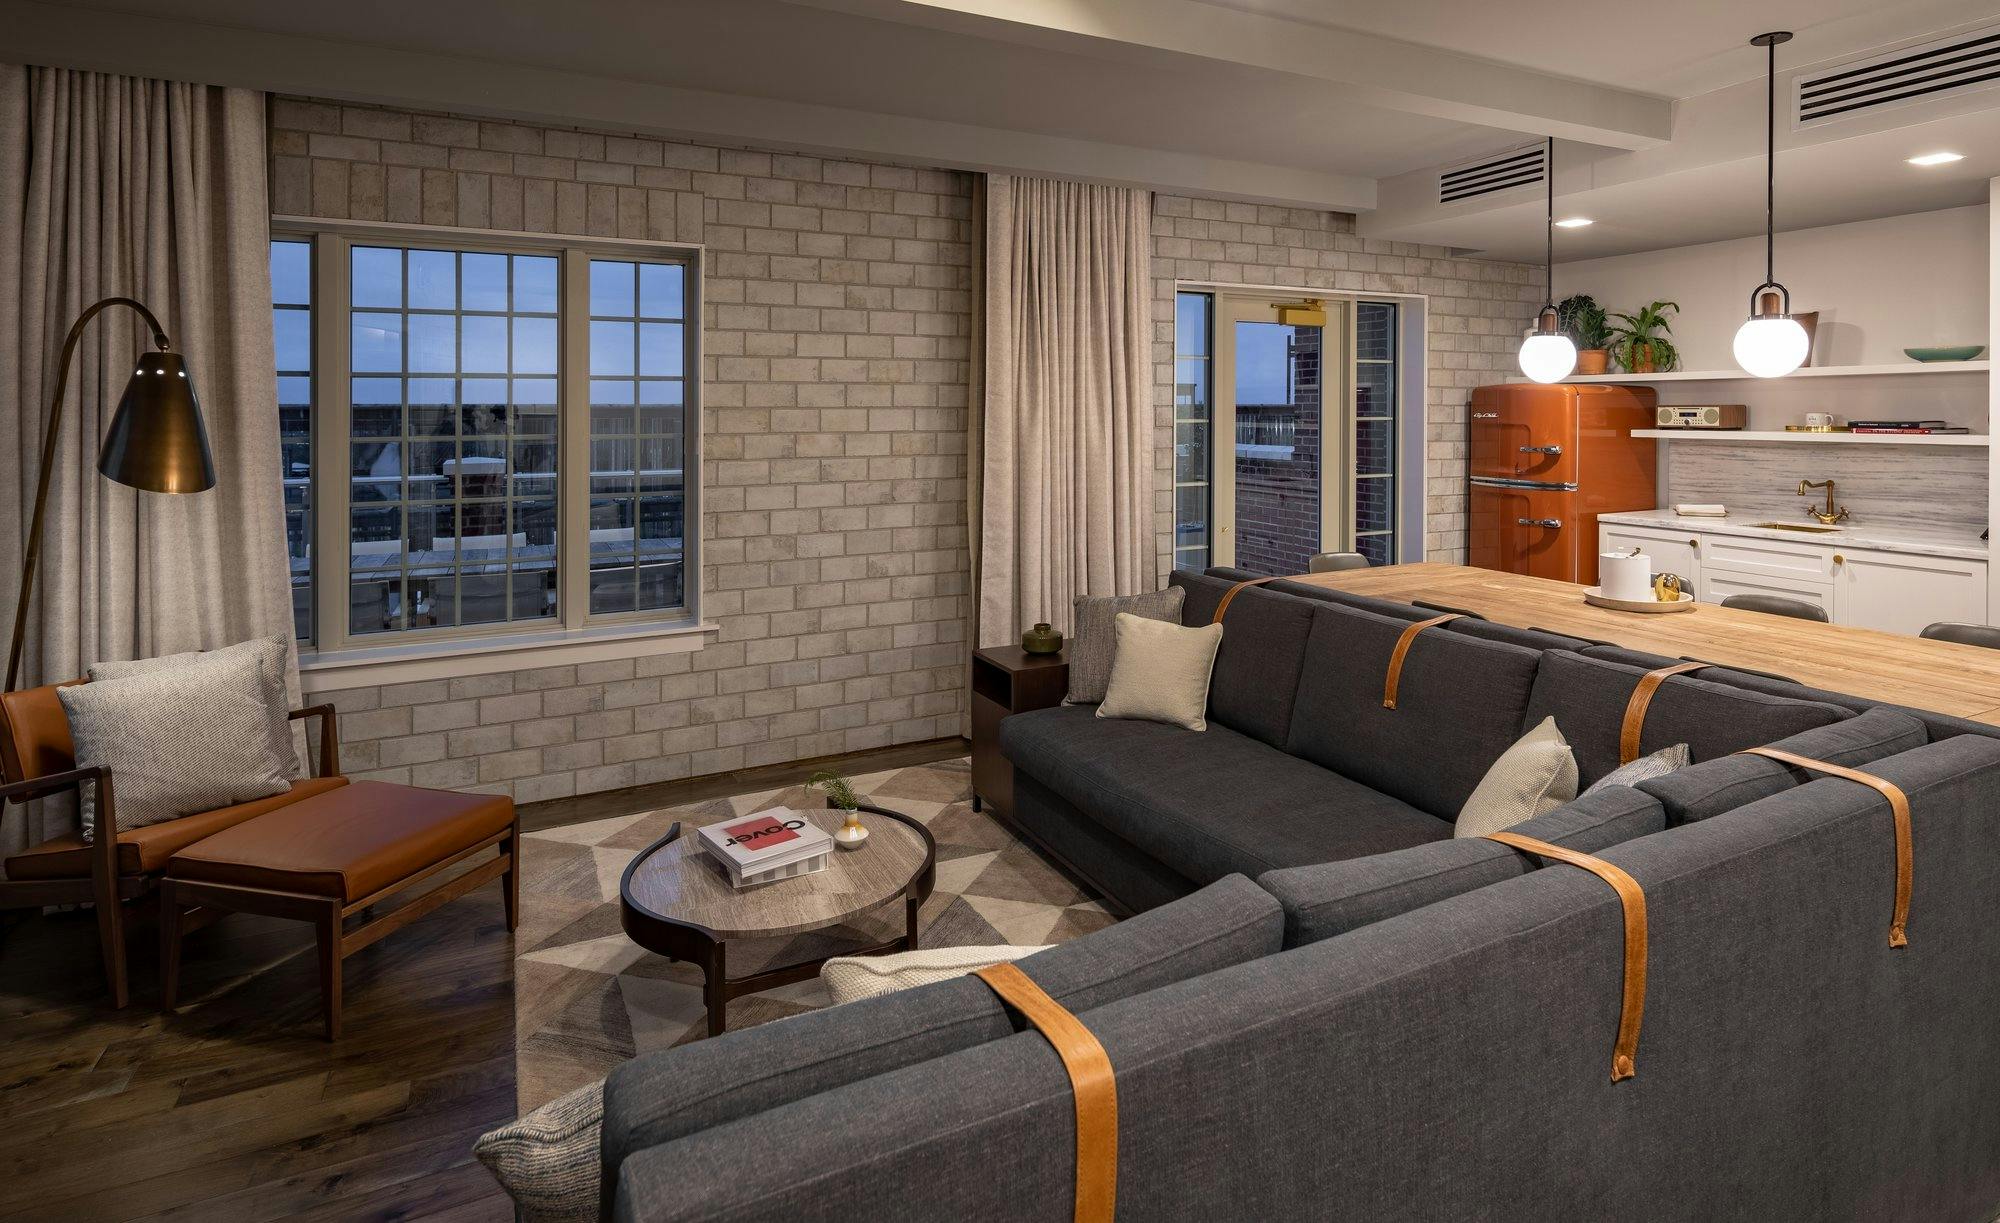 Living space of a hotel room at The Alida Hotel with a gray masonry wall, dark gray couch, and leather accents. A kitchenette with a rust colored retro refrigerator can be seen in the back of the room.